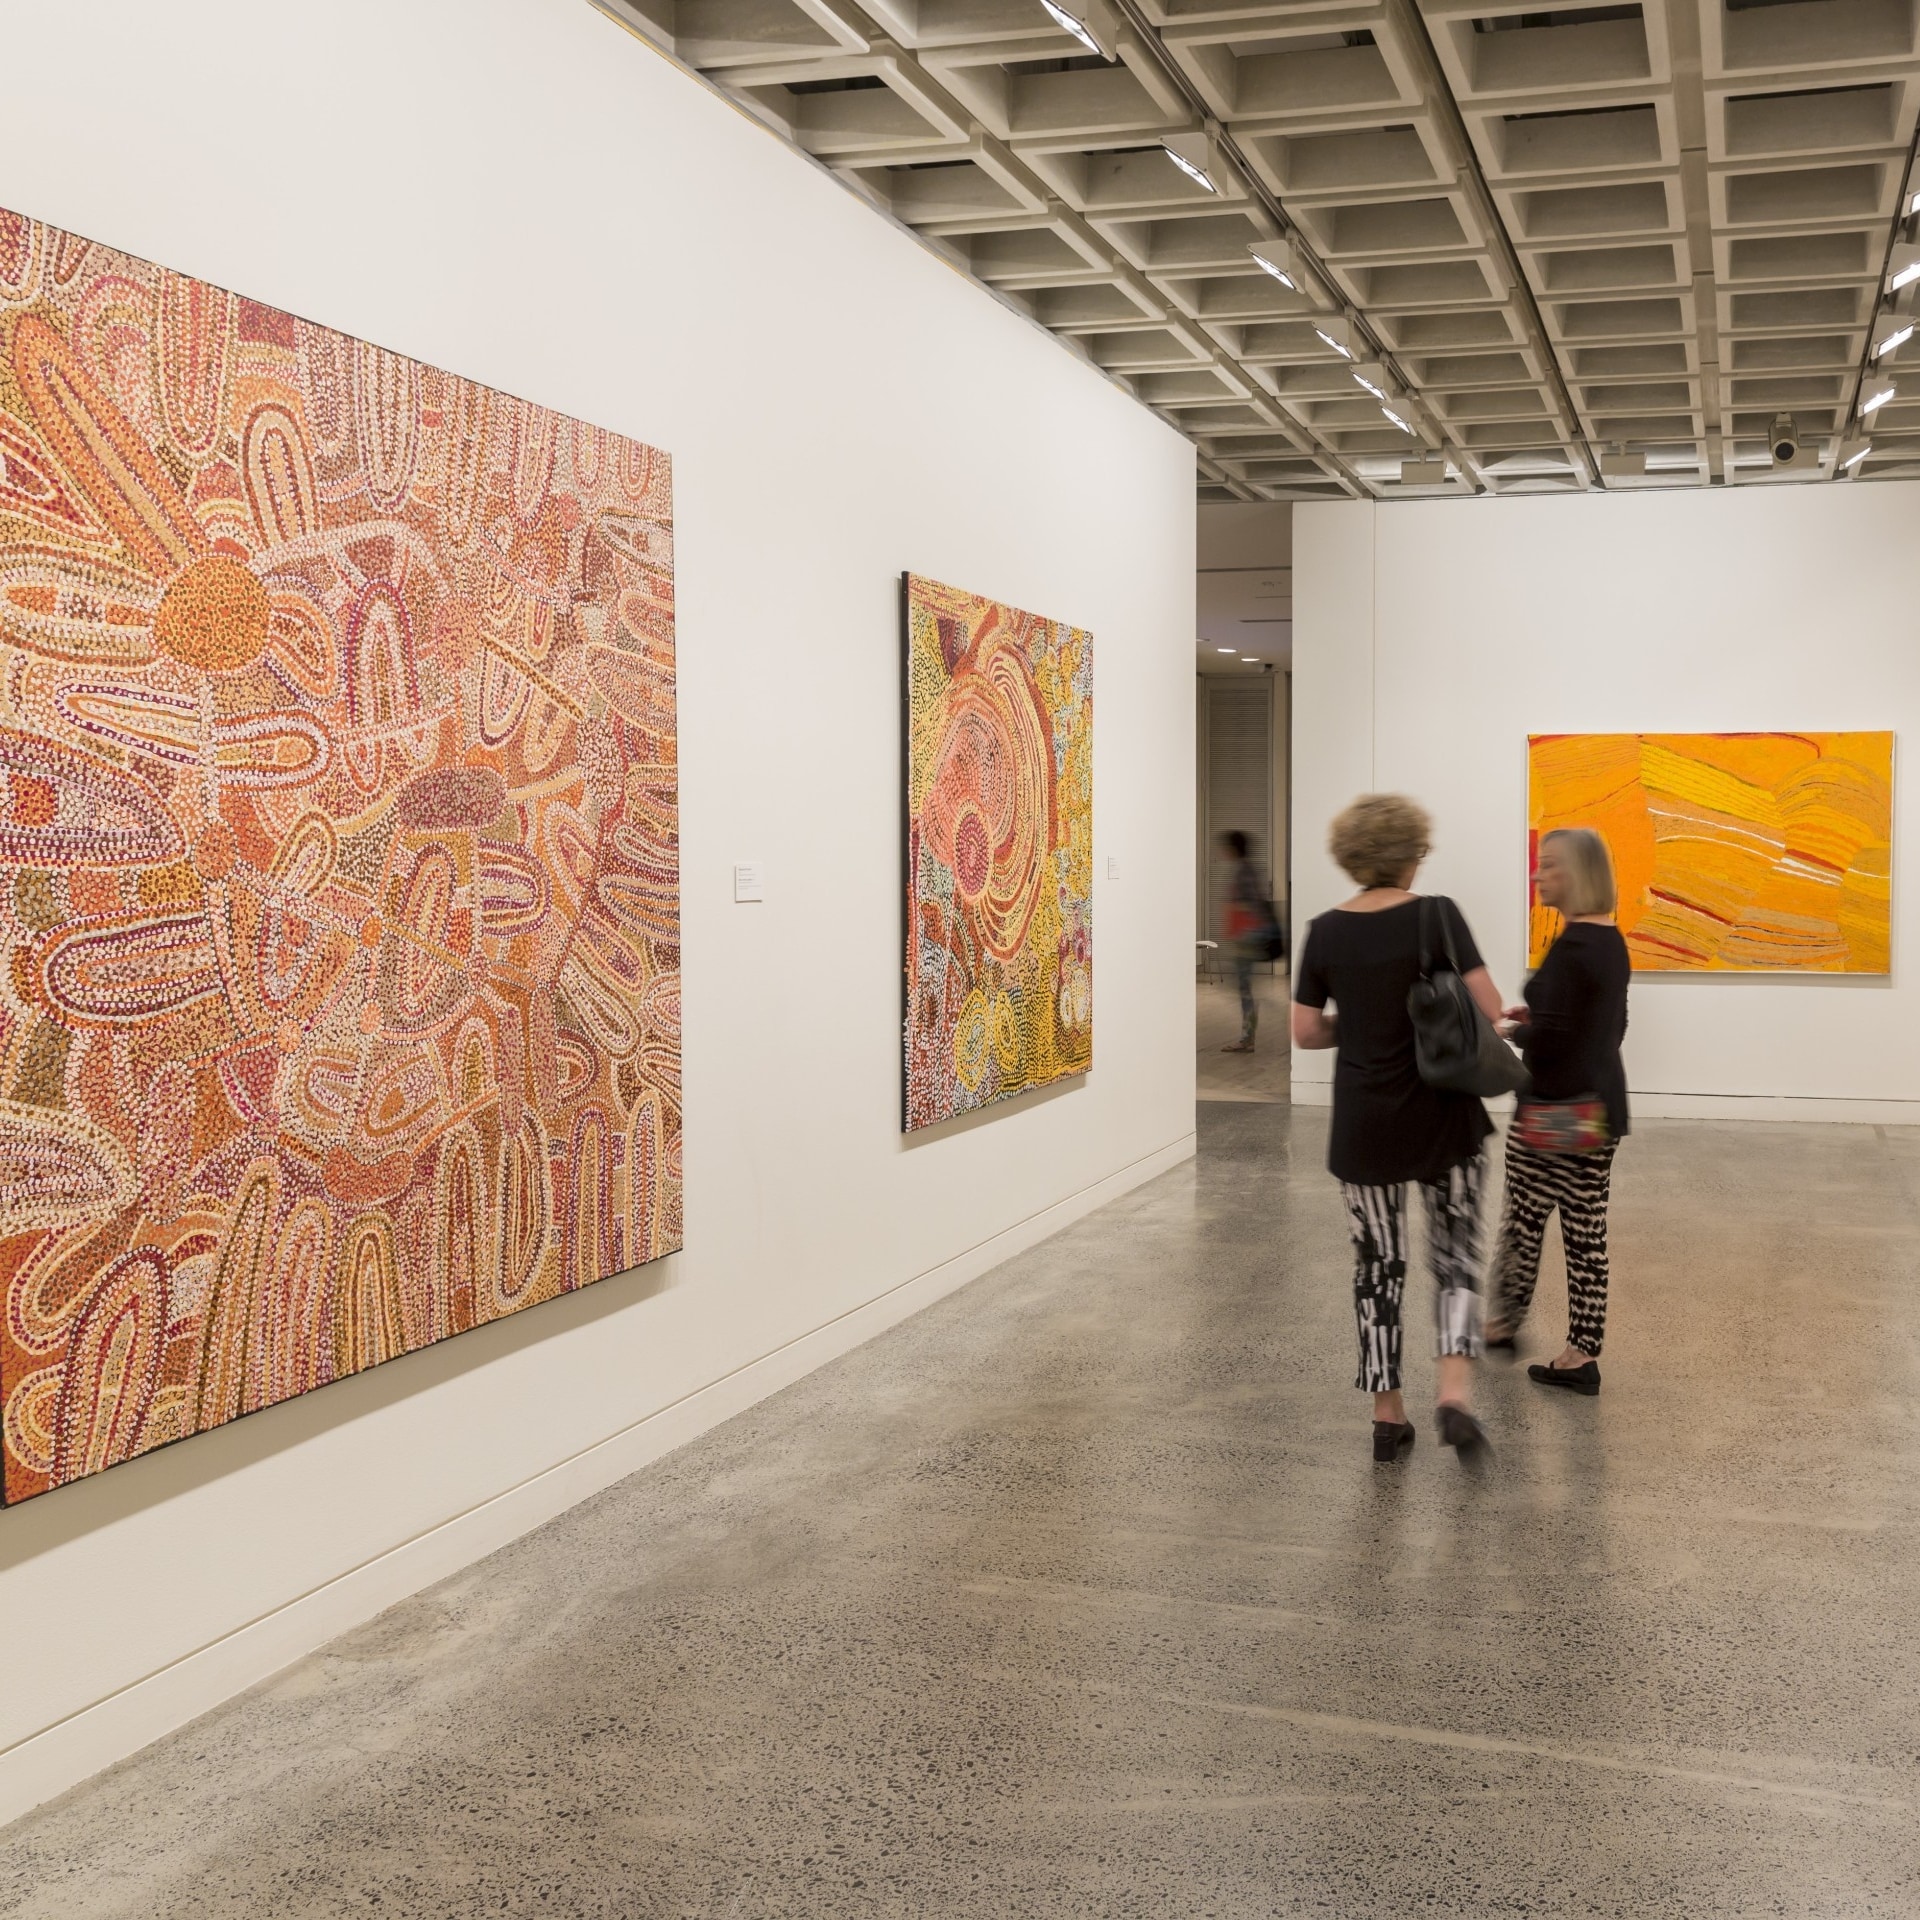 Art Gallery of New South Wales di Sydney© Daniel Boud, Destination New South Wales